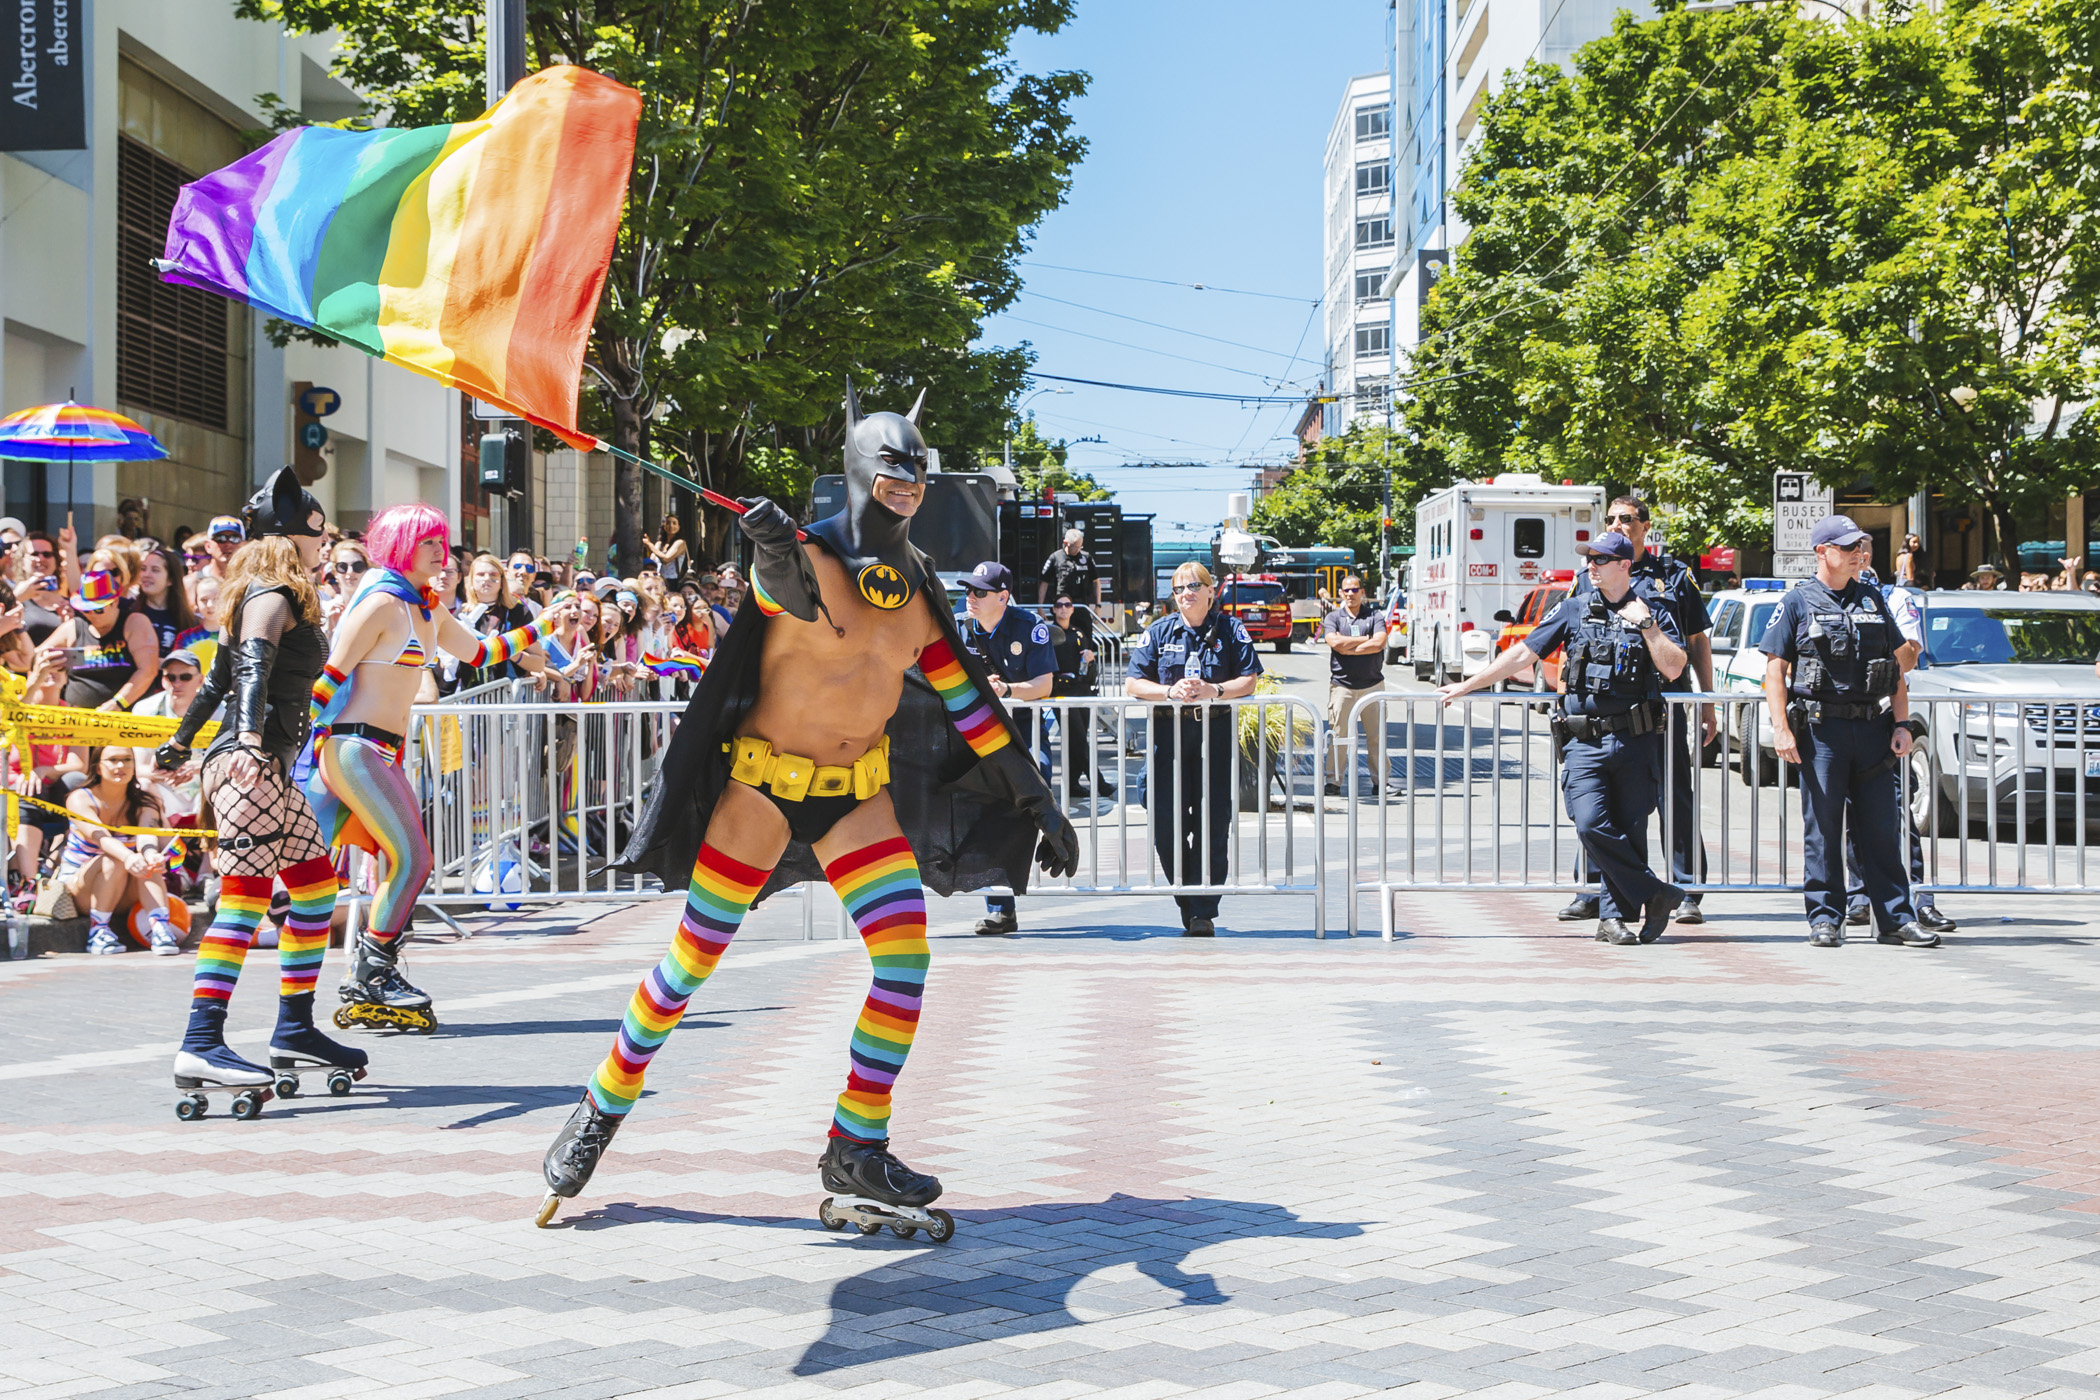 seattle gay pride 2021 cancelled